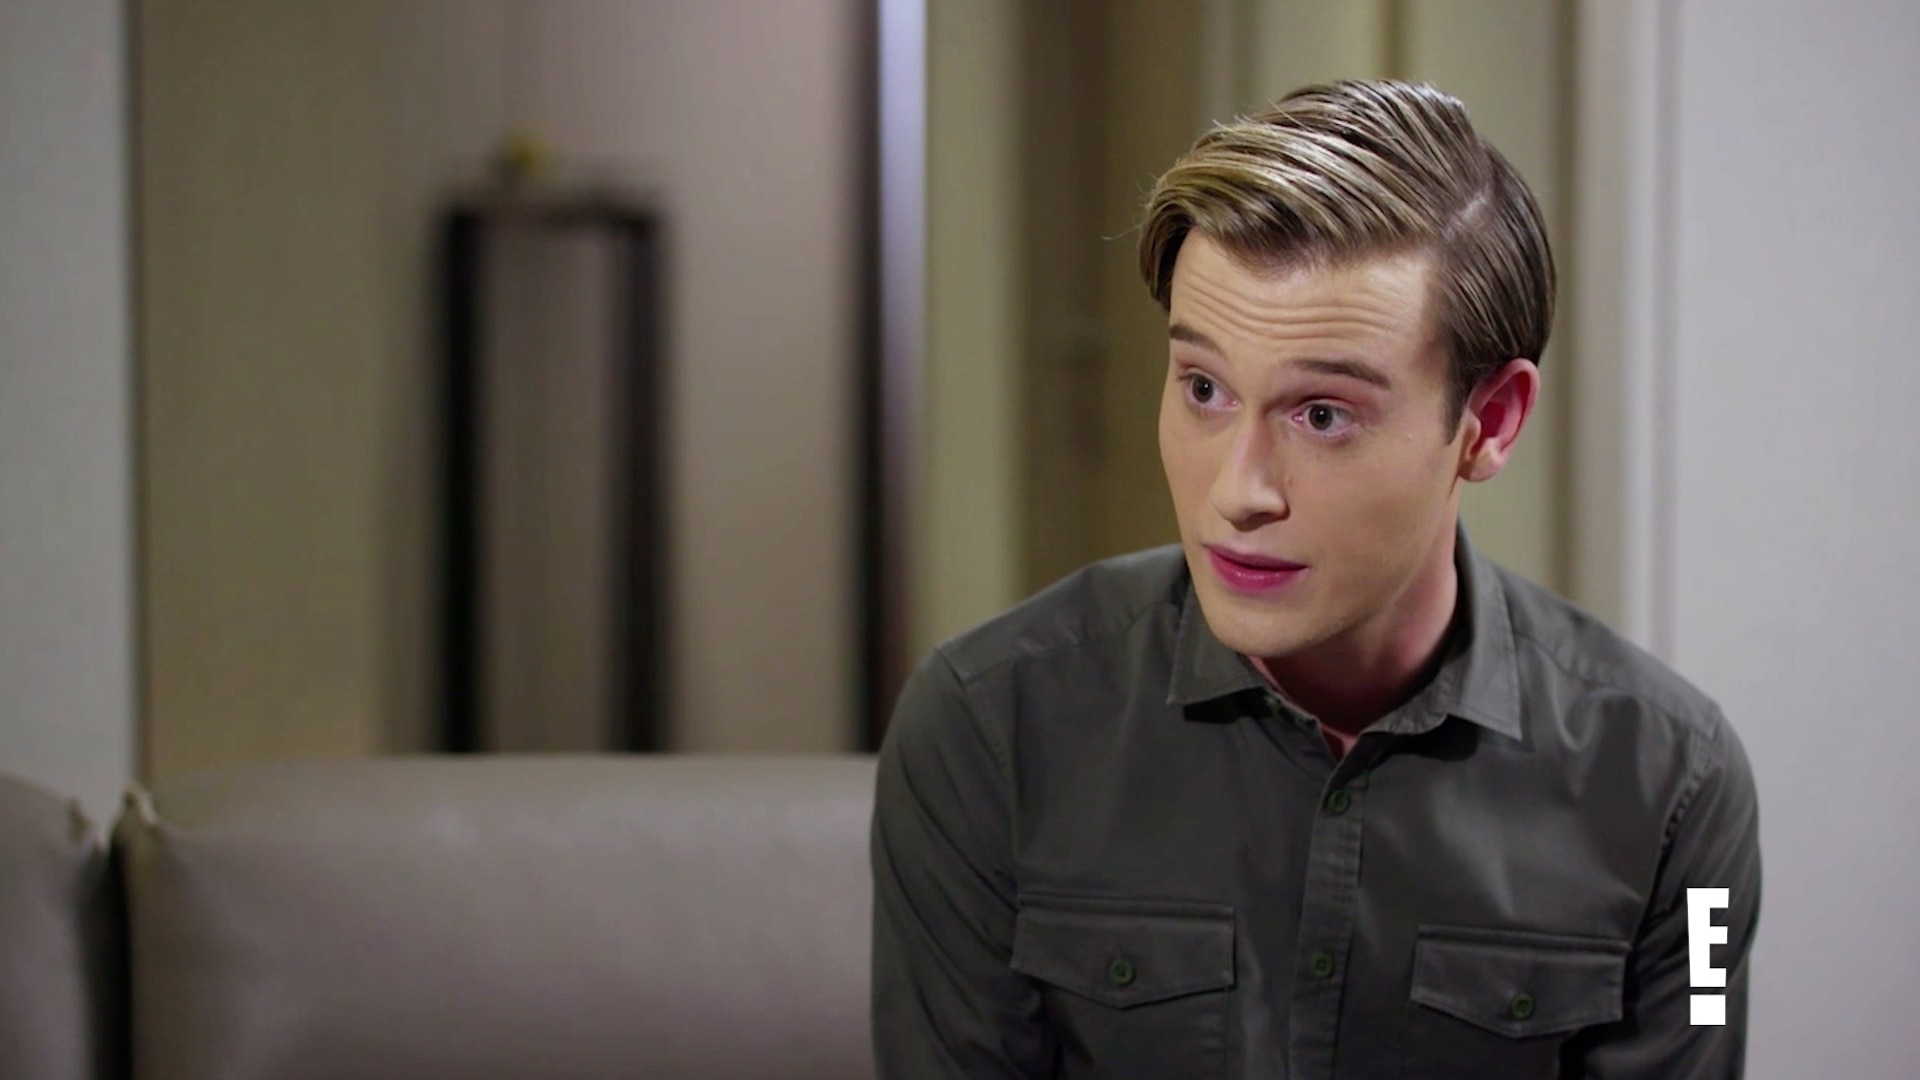 Smiley Face Killers: Tommy Booth's Mother Meets with Tyler Henry of "Hollywood Medium"